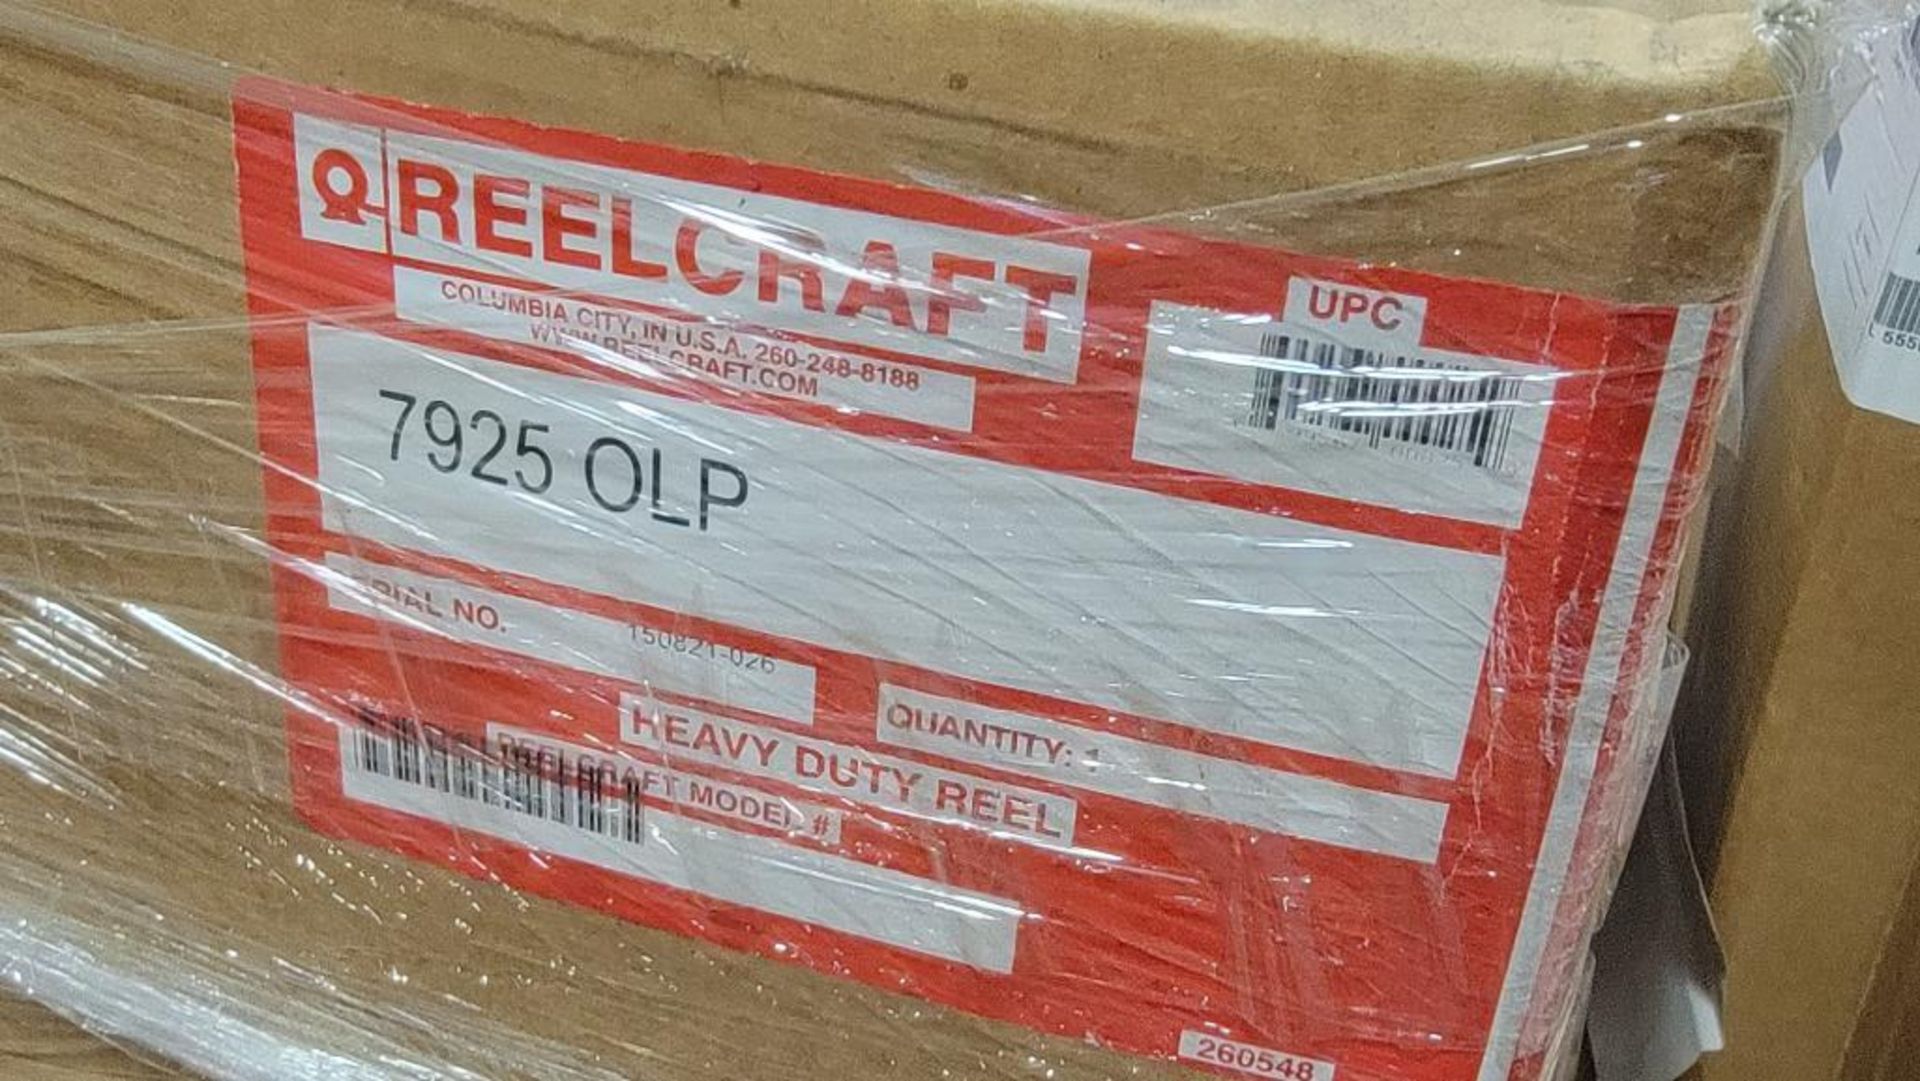 (4) Reelcraft & Other Hose Reels, (3) Model 795 OLP, (1) Model NA (New in Box) - Image 6 of 6